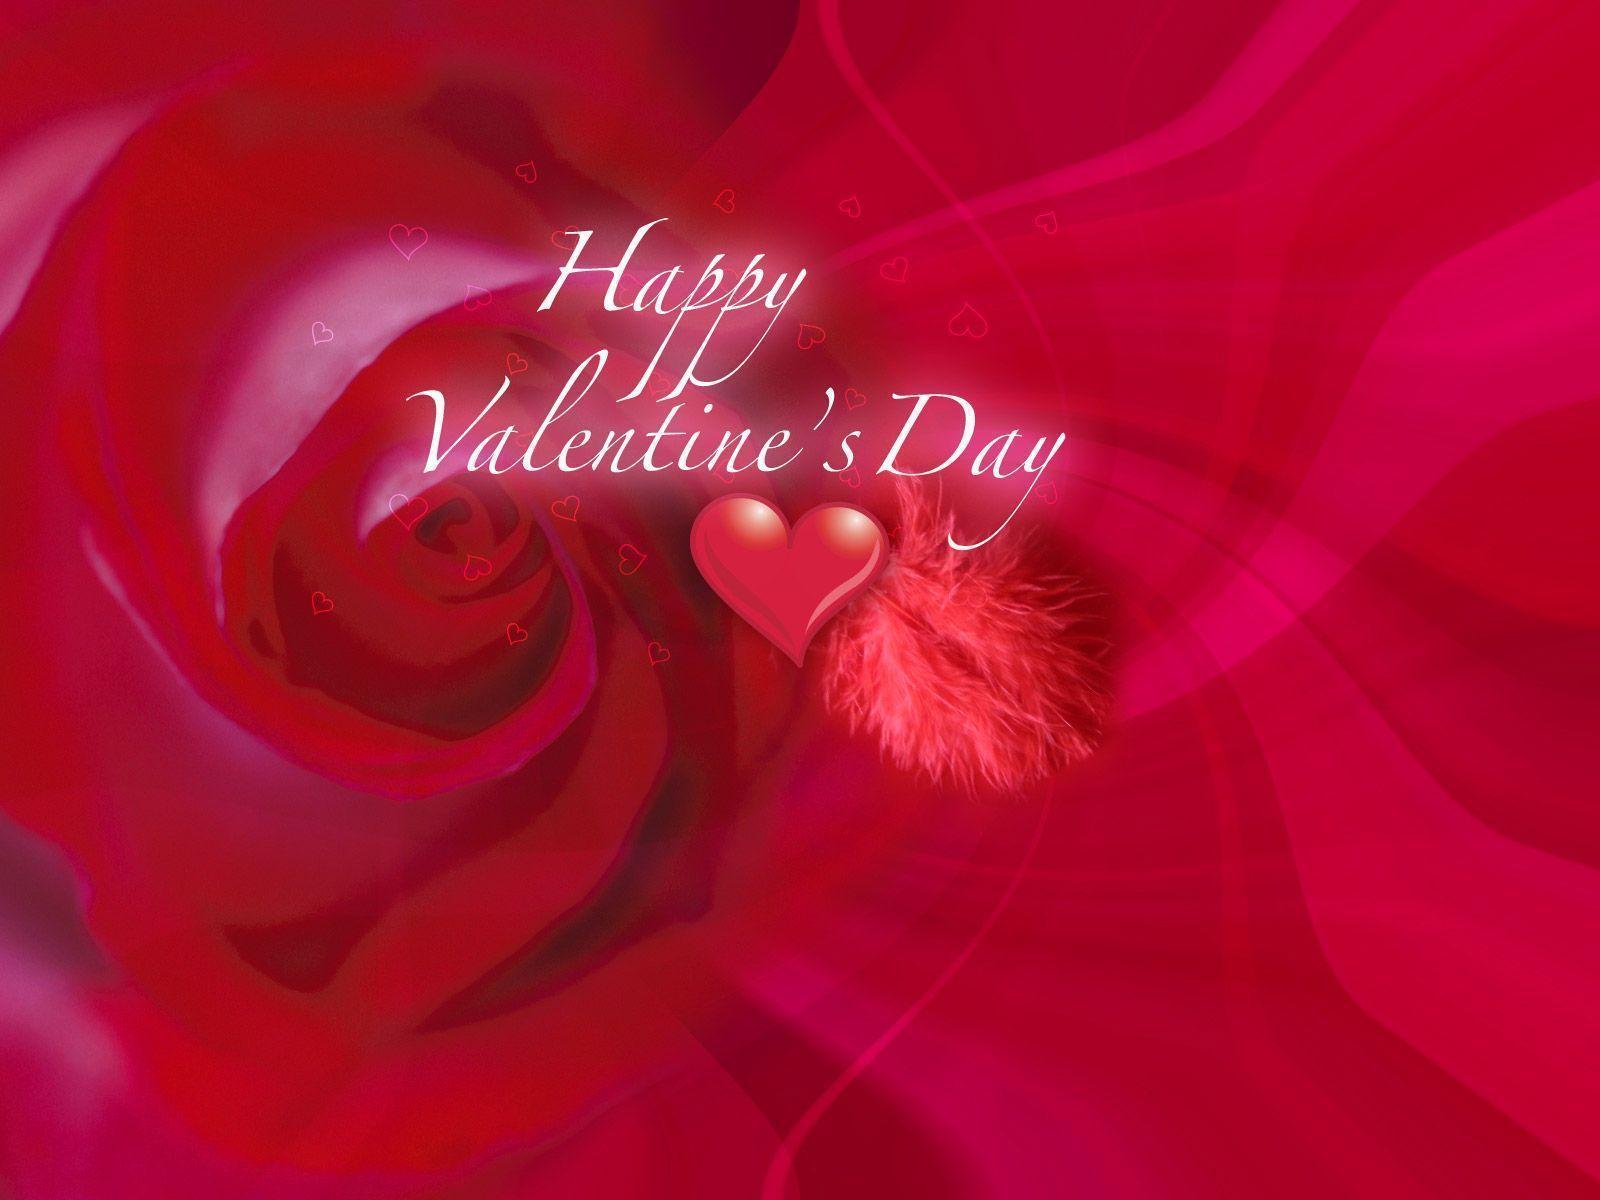 Valentines Day Wallpaper 2013 LOVE QUOTES